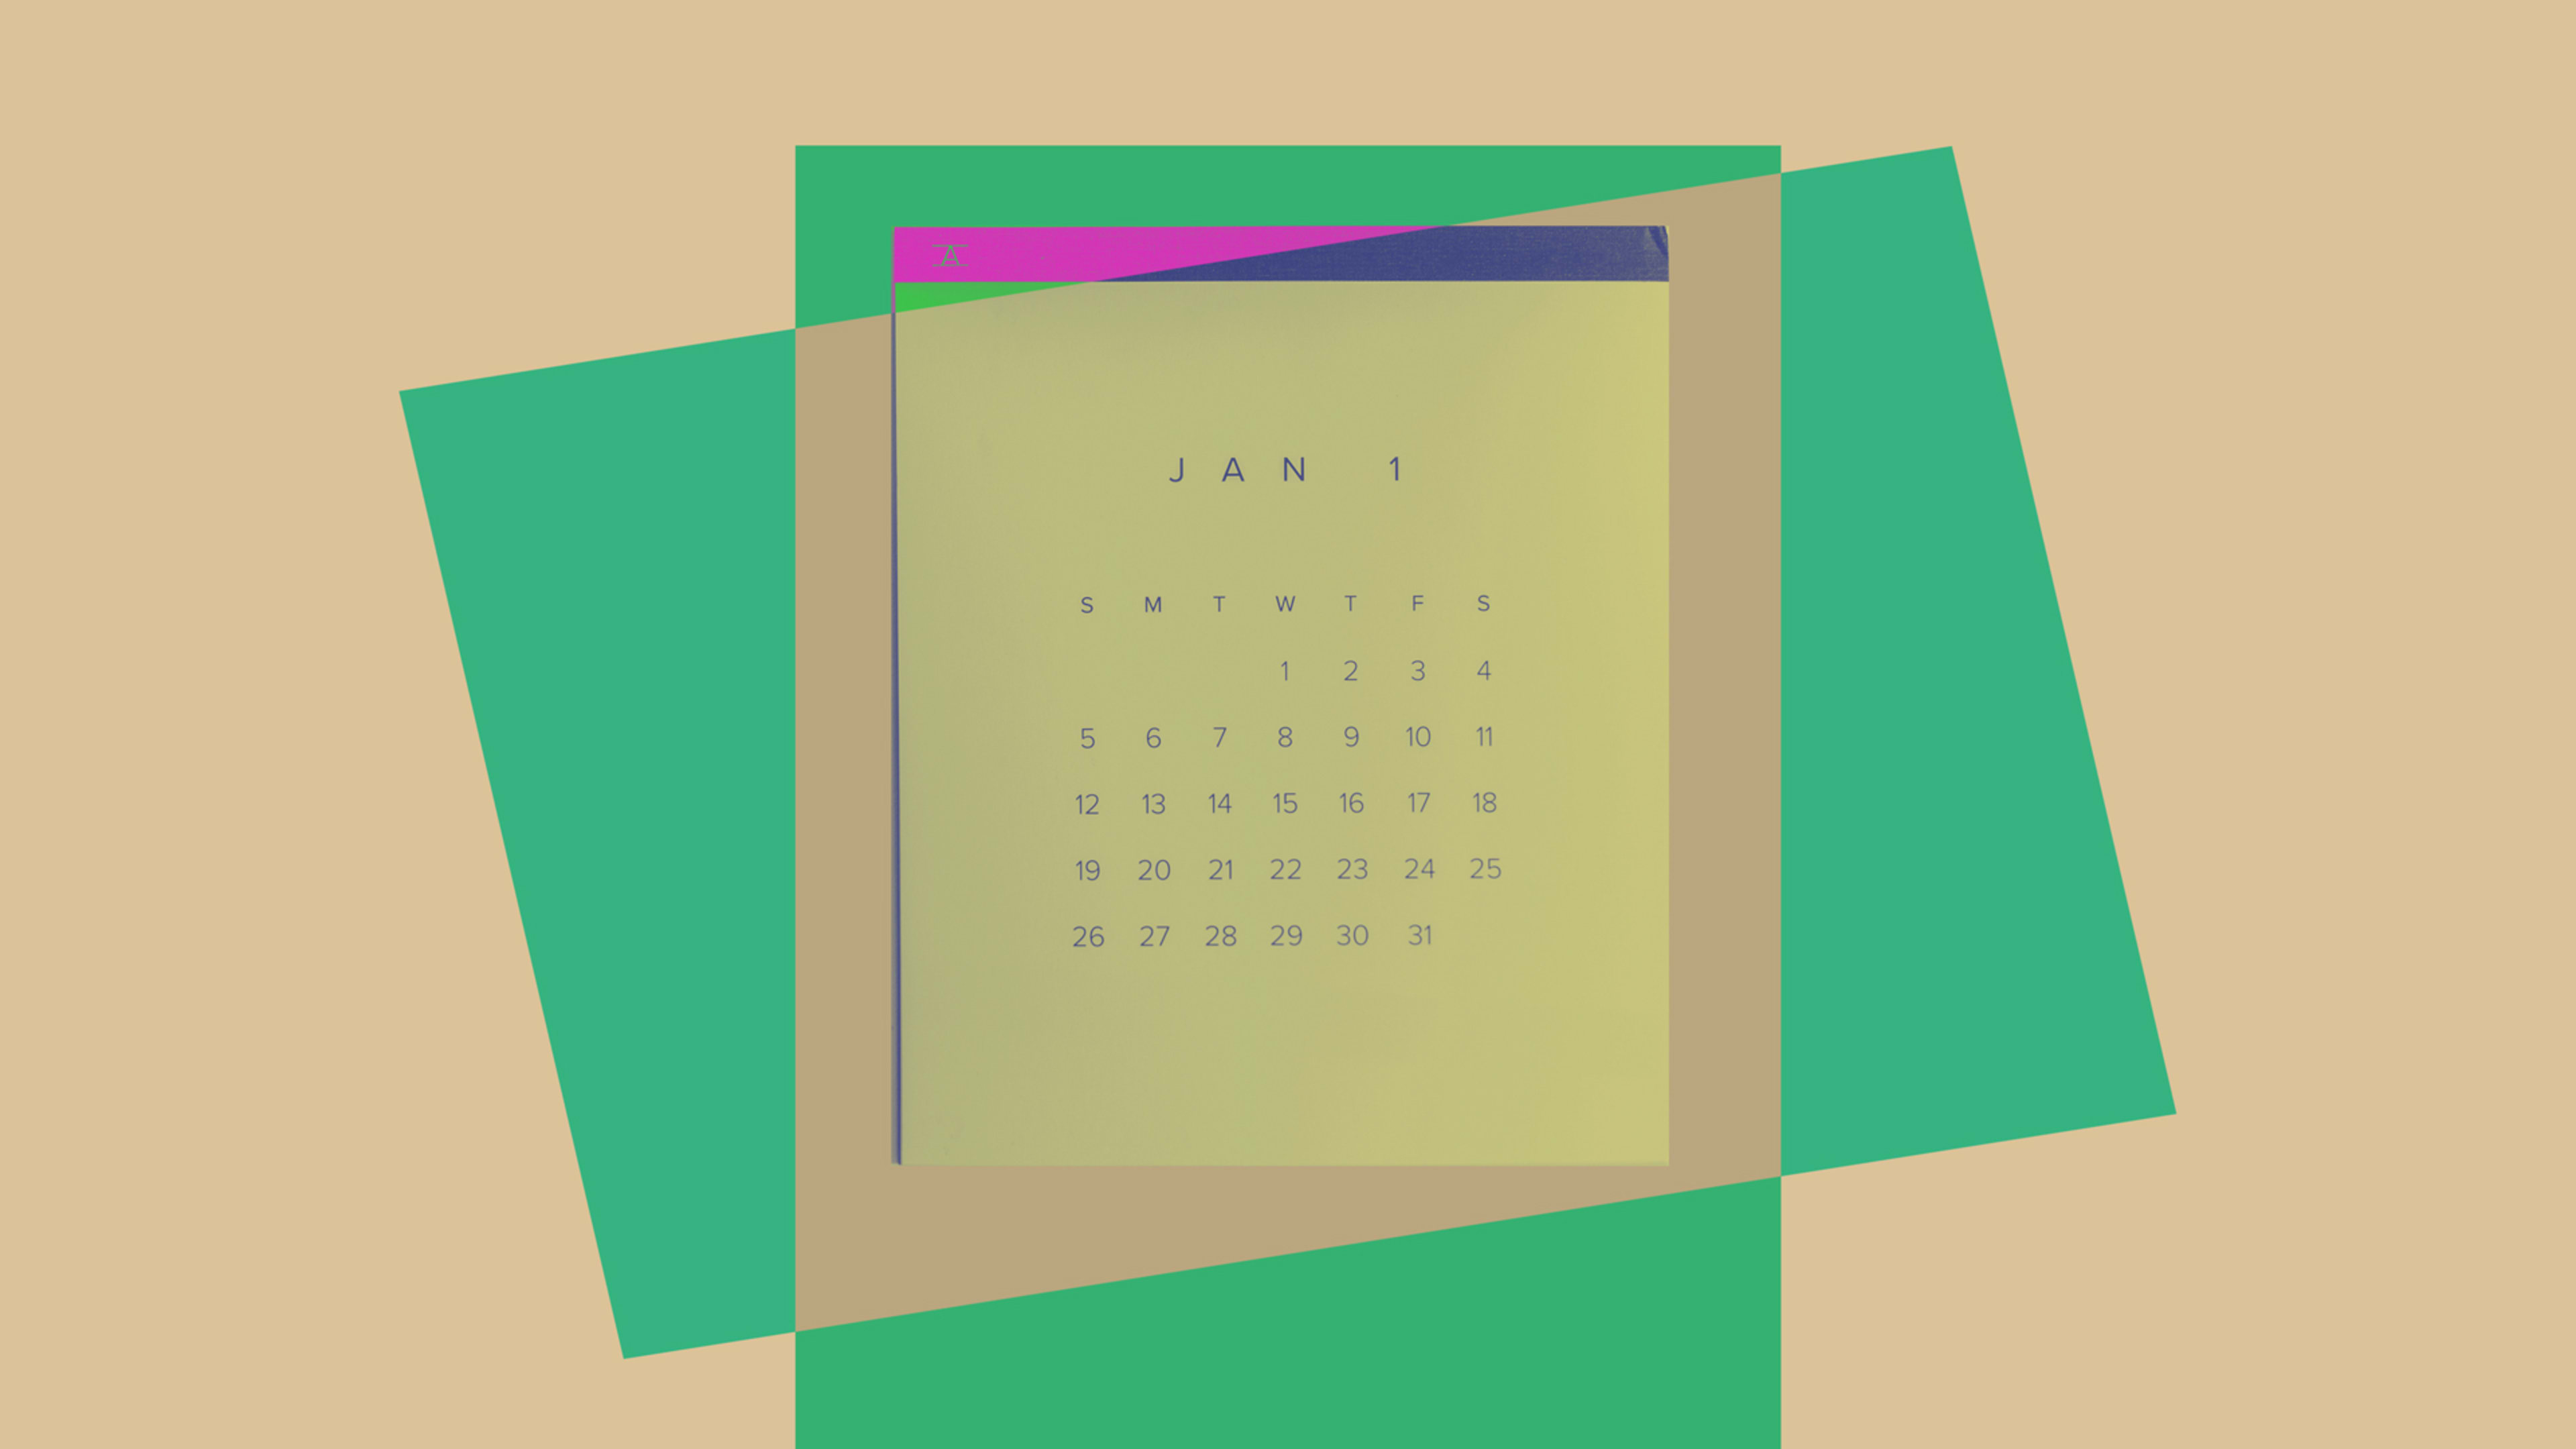 I just reviewed my 2021 calendar. Here are 3 mistakes I made